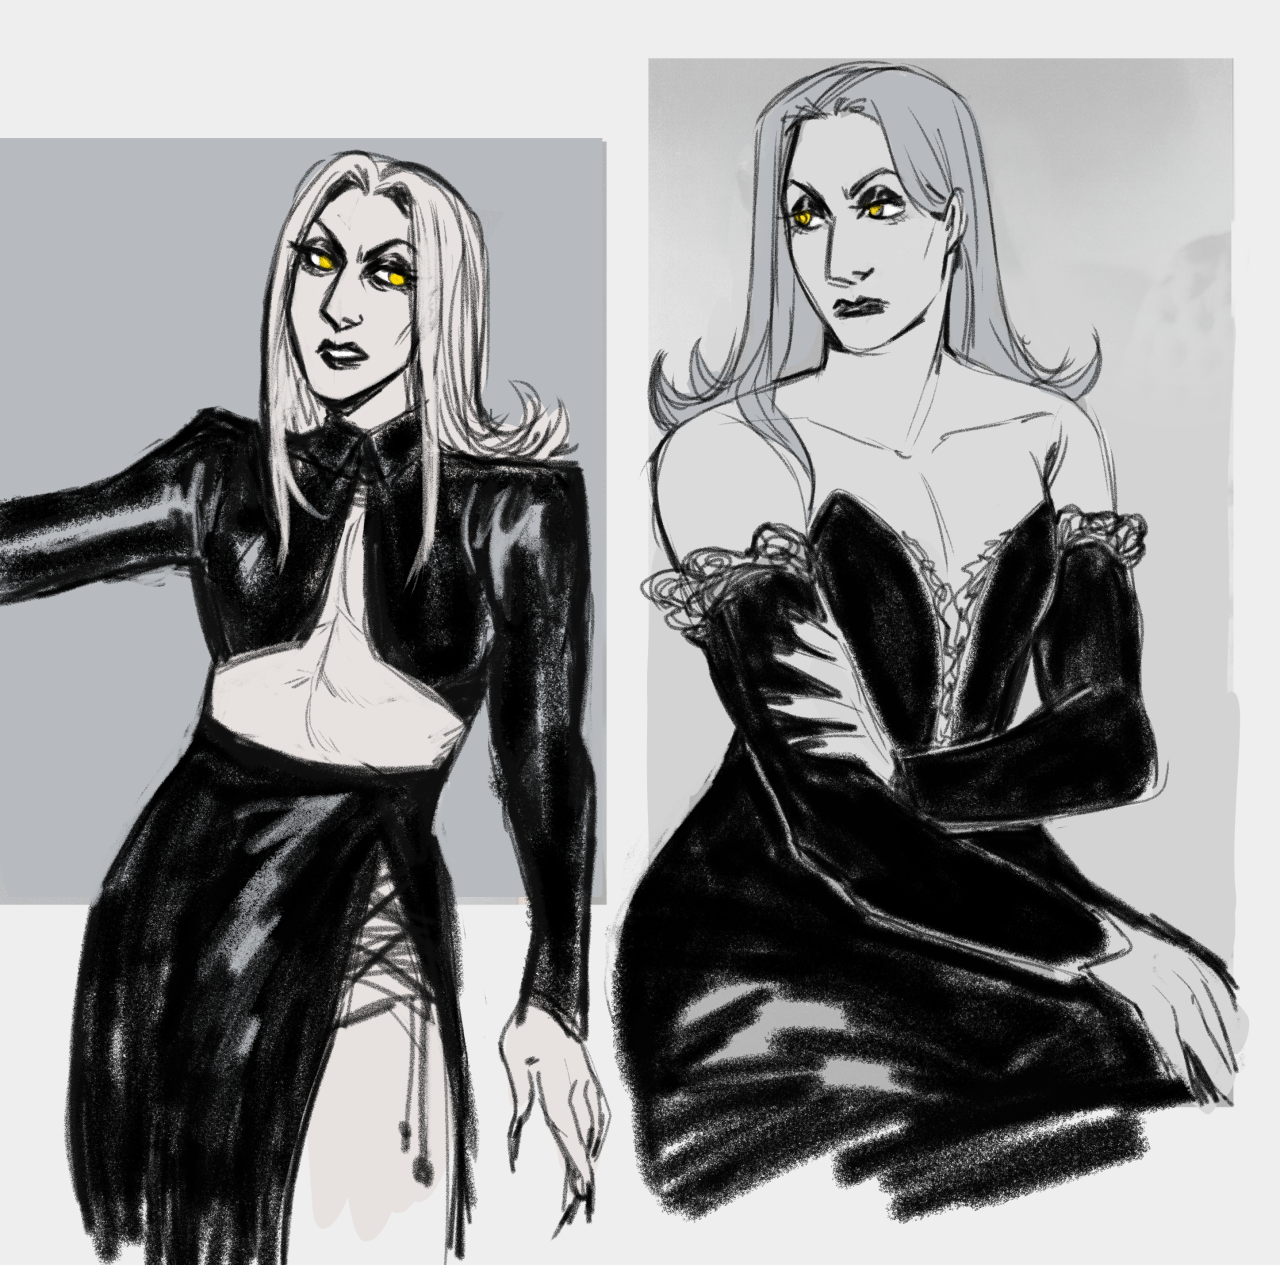 this goes out to all the homies posting pics of pretty dresses and captioning them ‘Leone Abbacchio’ because it keeps me 